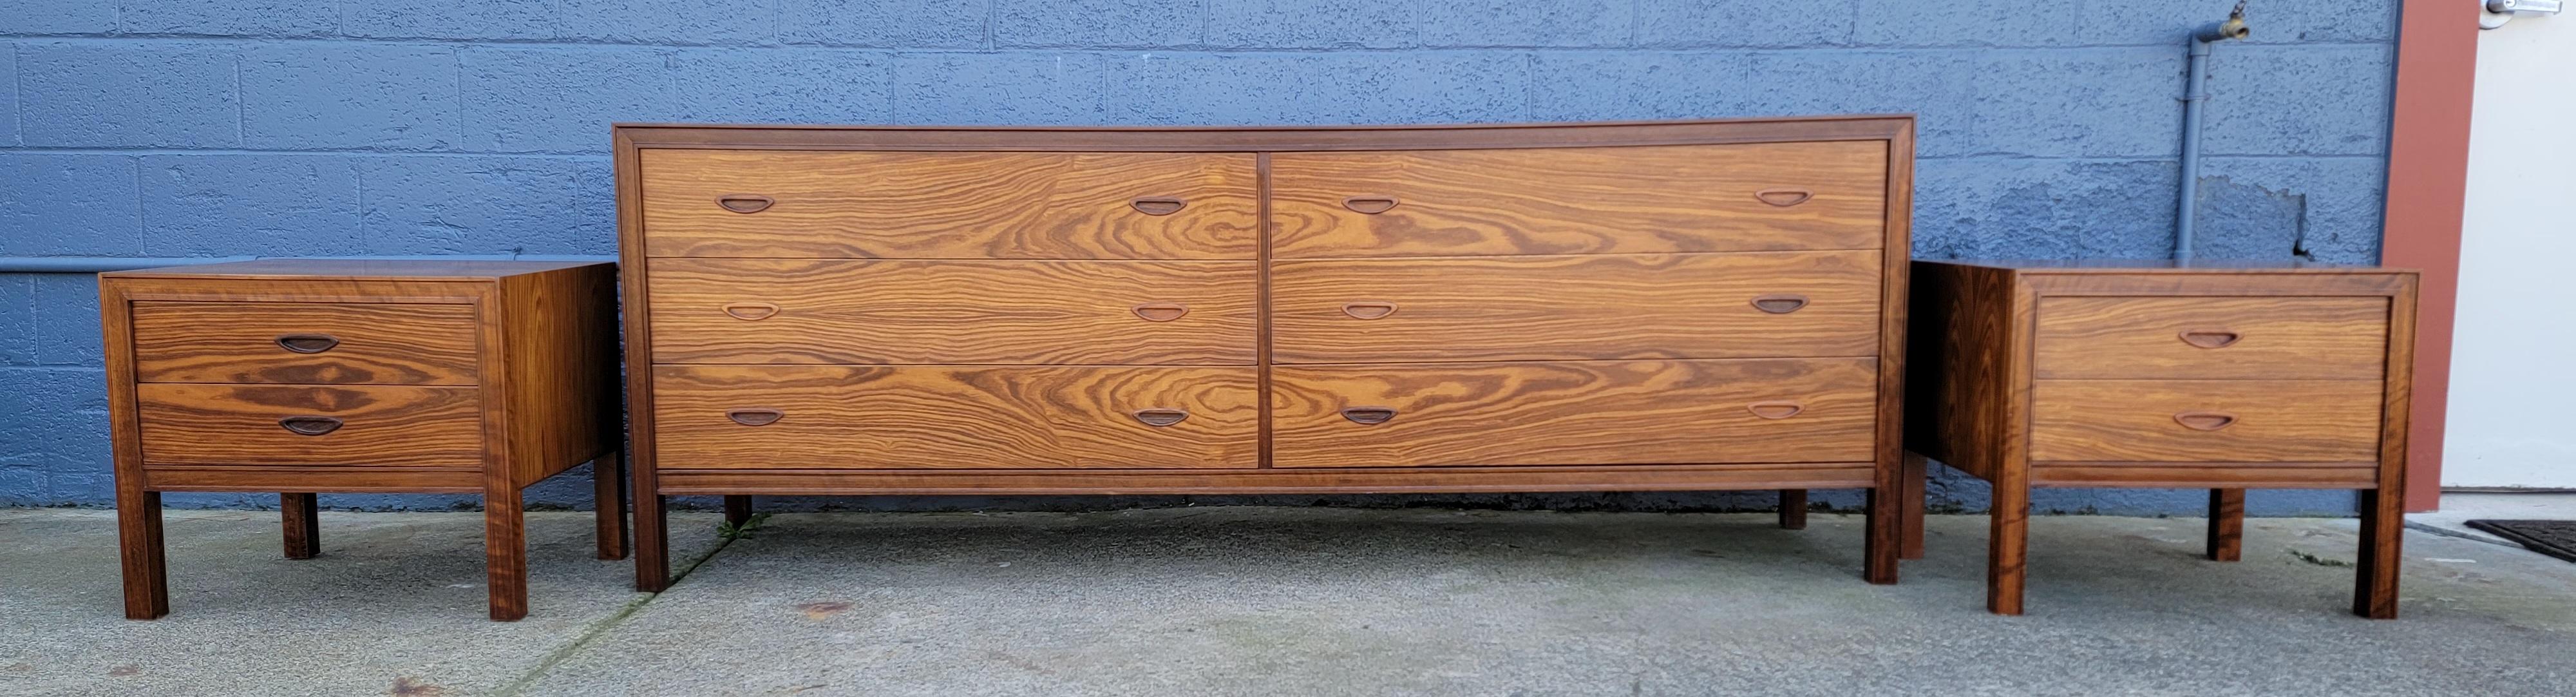 Fine Scandinavian Modern rosewood low dresser and matching nightstands. A three piece set. Extraordinary book matched wood grain with amazing figuring and contrasting color striations. Absolutely beautiful. Excellent original finish and condition.